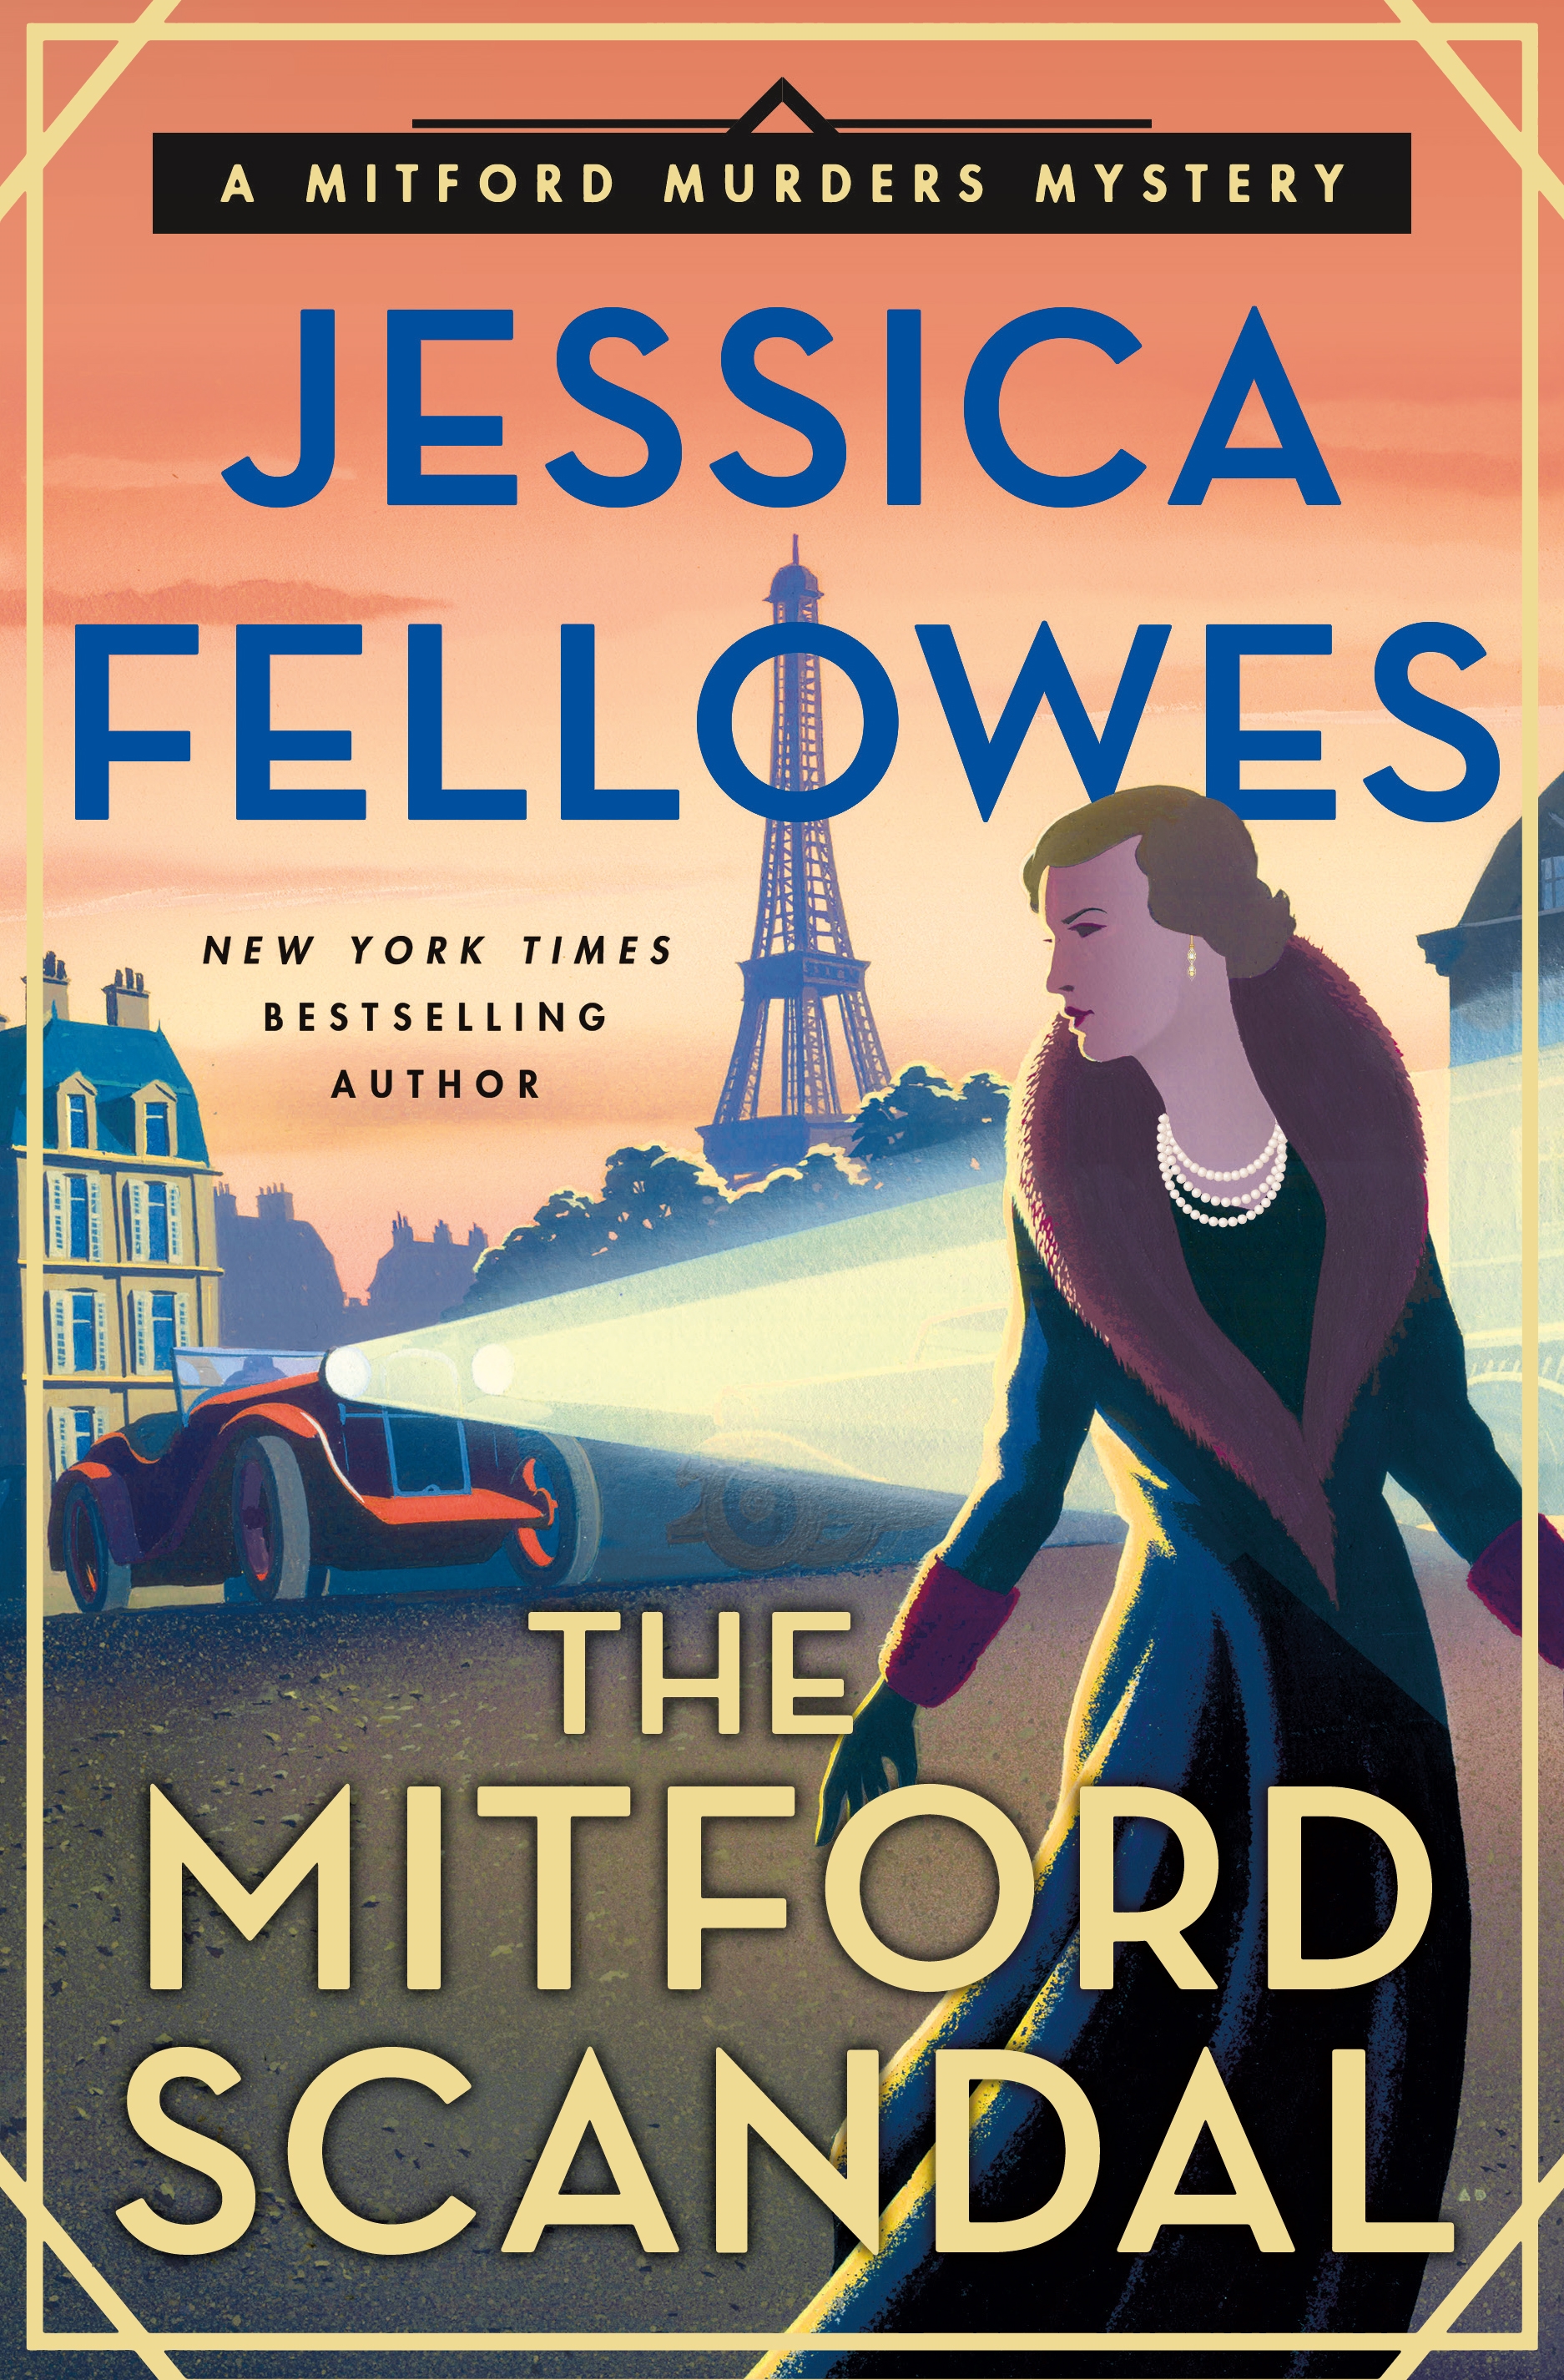 Umschlagbild für The Mitford Scandal [electronic resource] : A Mitford Murders Mystery